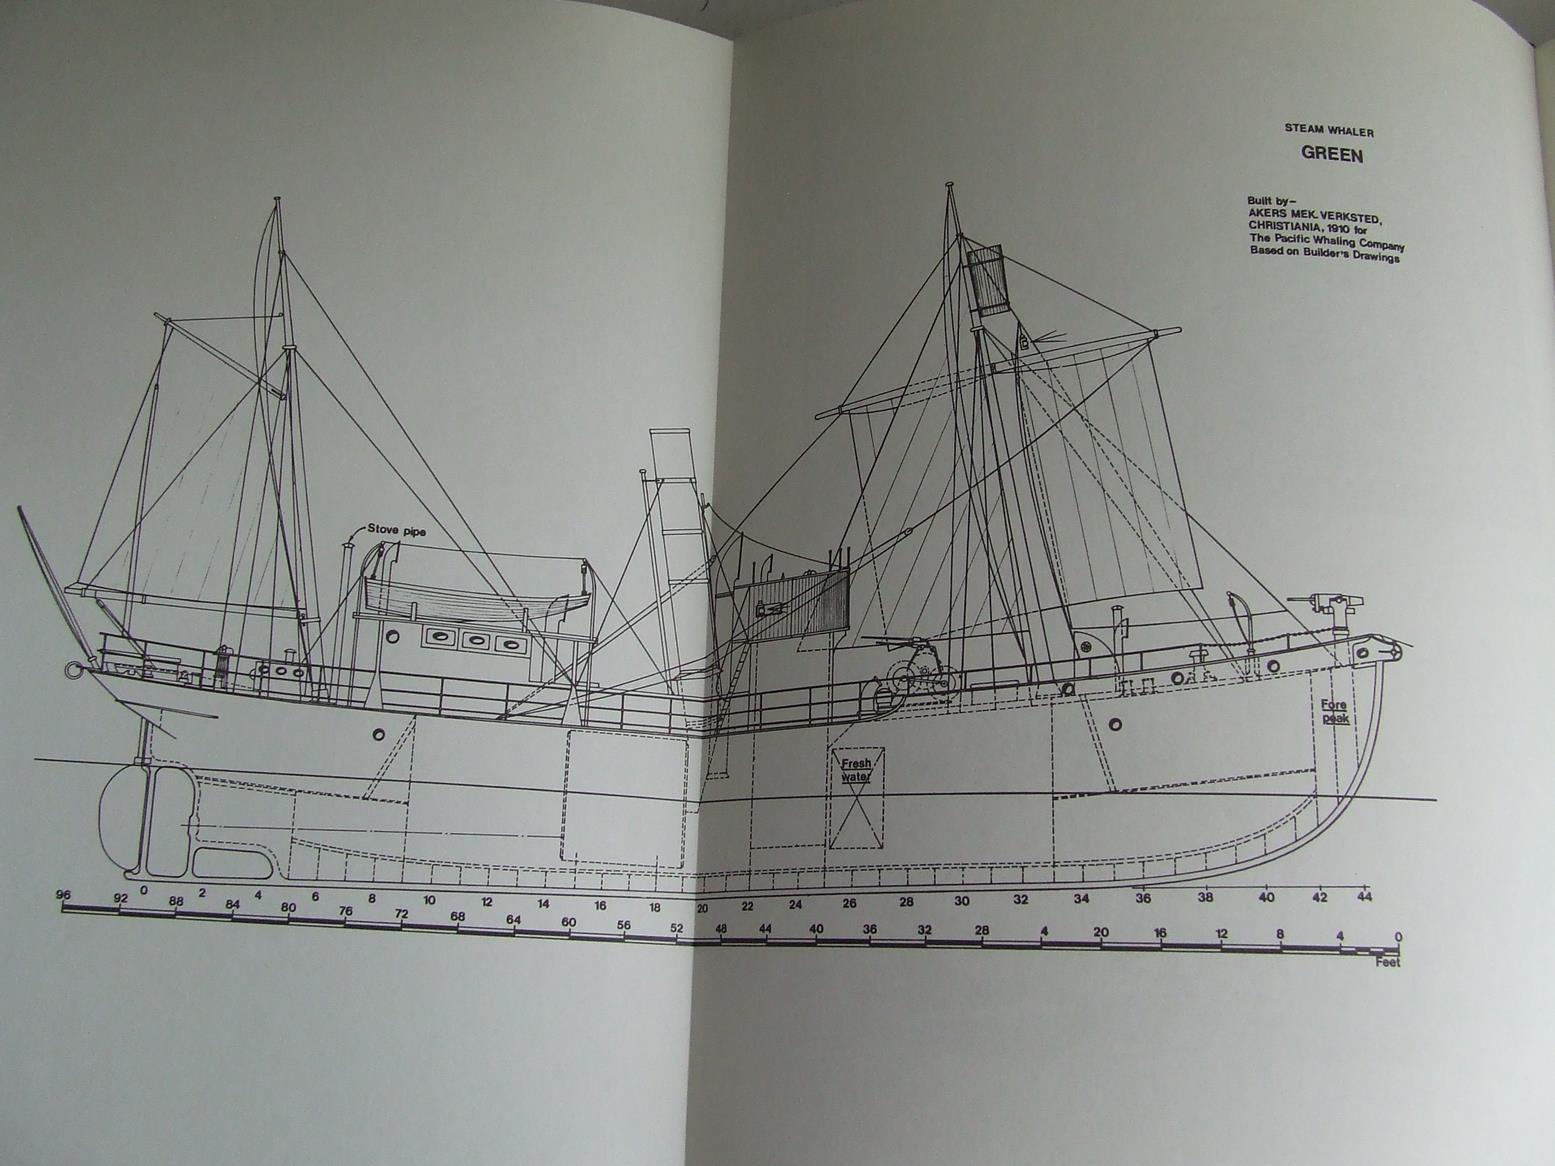 Catchers and Corvettes, the steam whalecatcher in peace and war 1860-1960